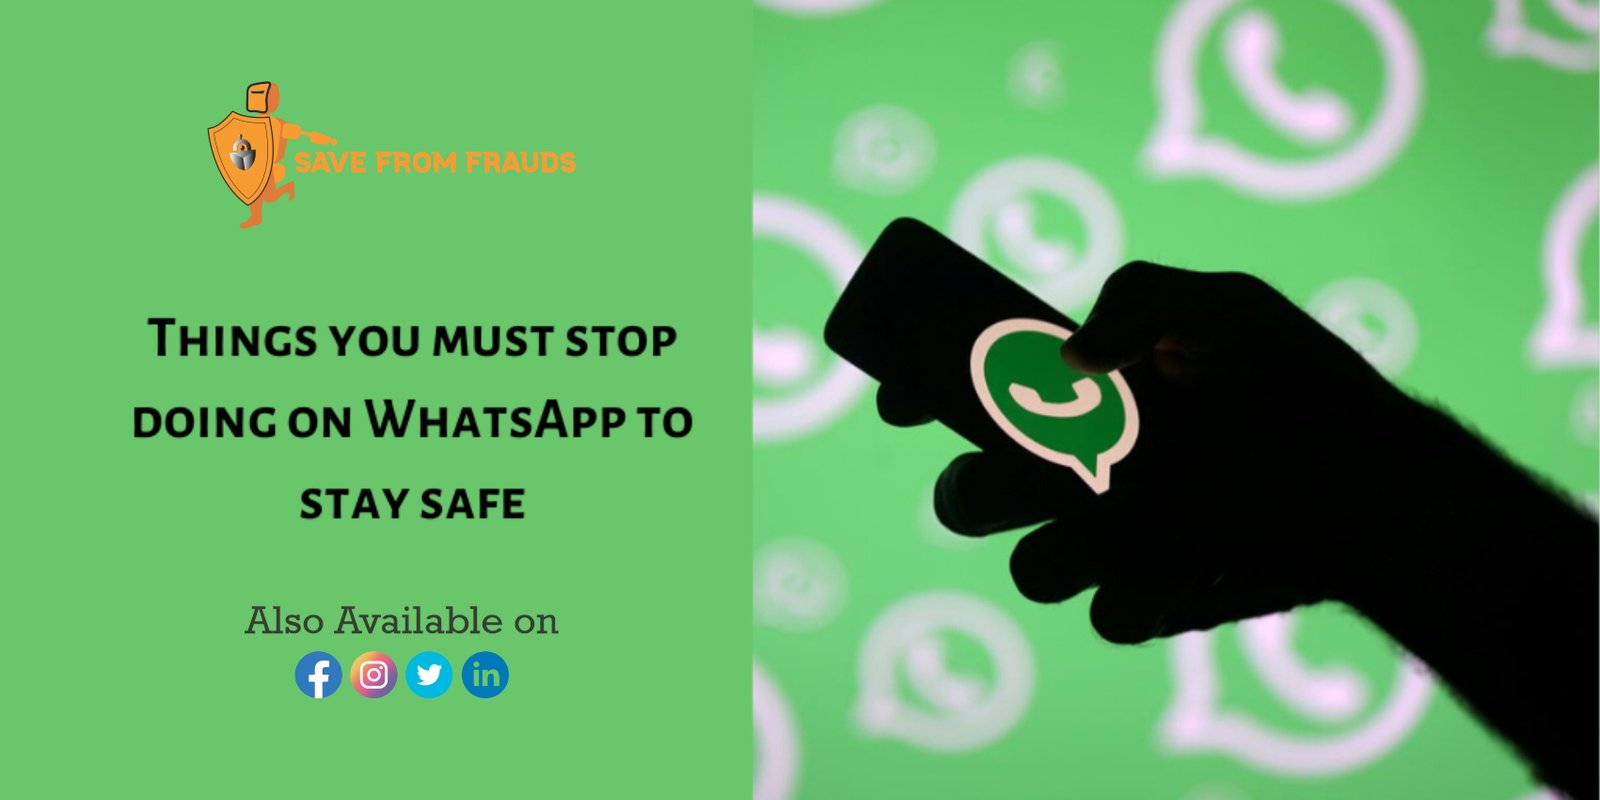 Stay safe on WhatsApp by avoiding these mistakes